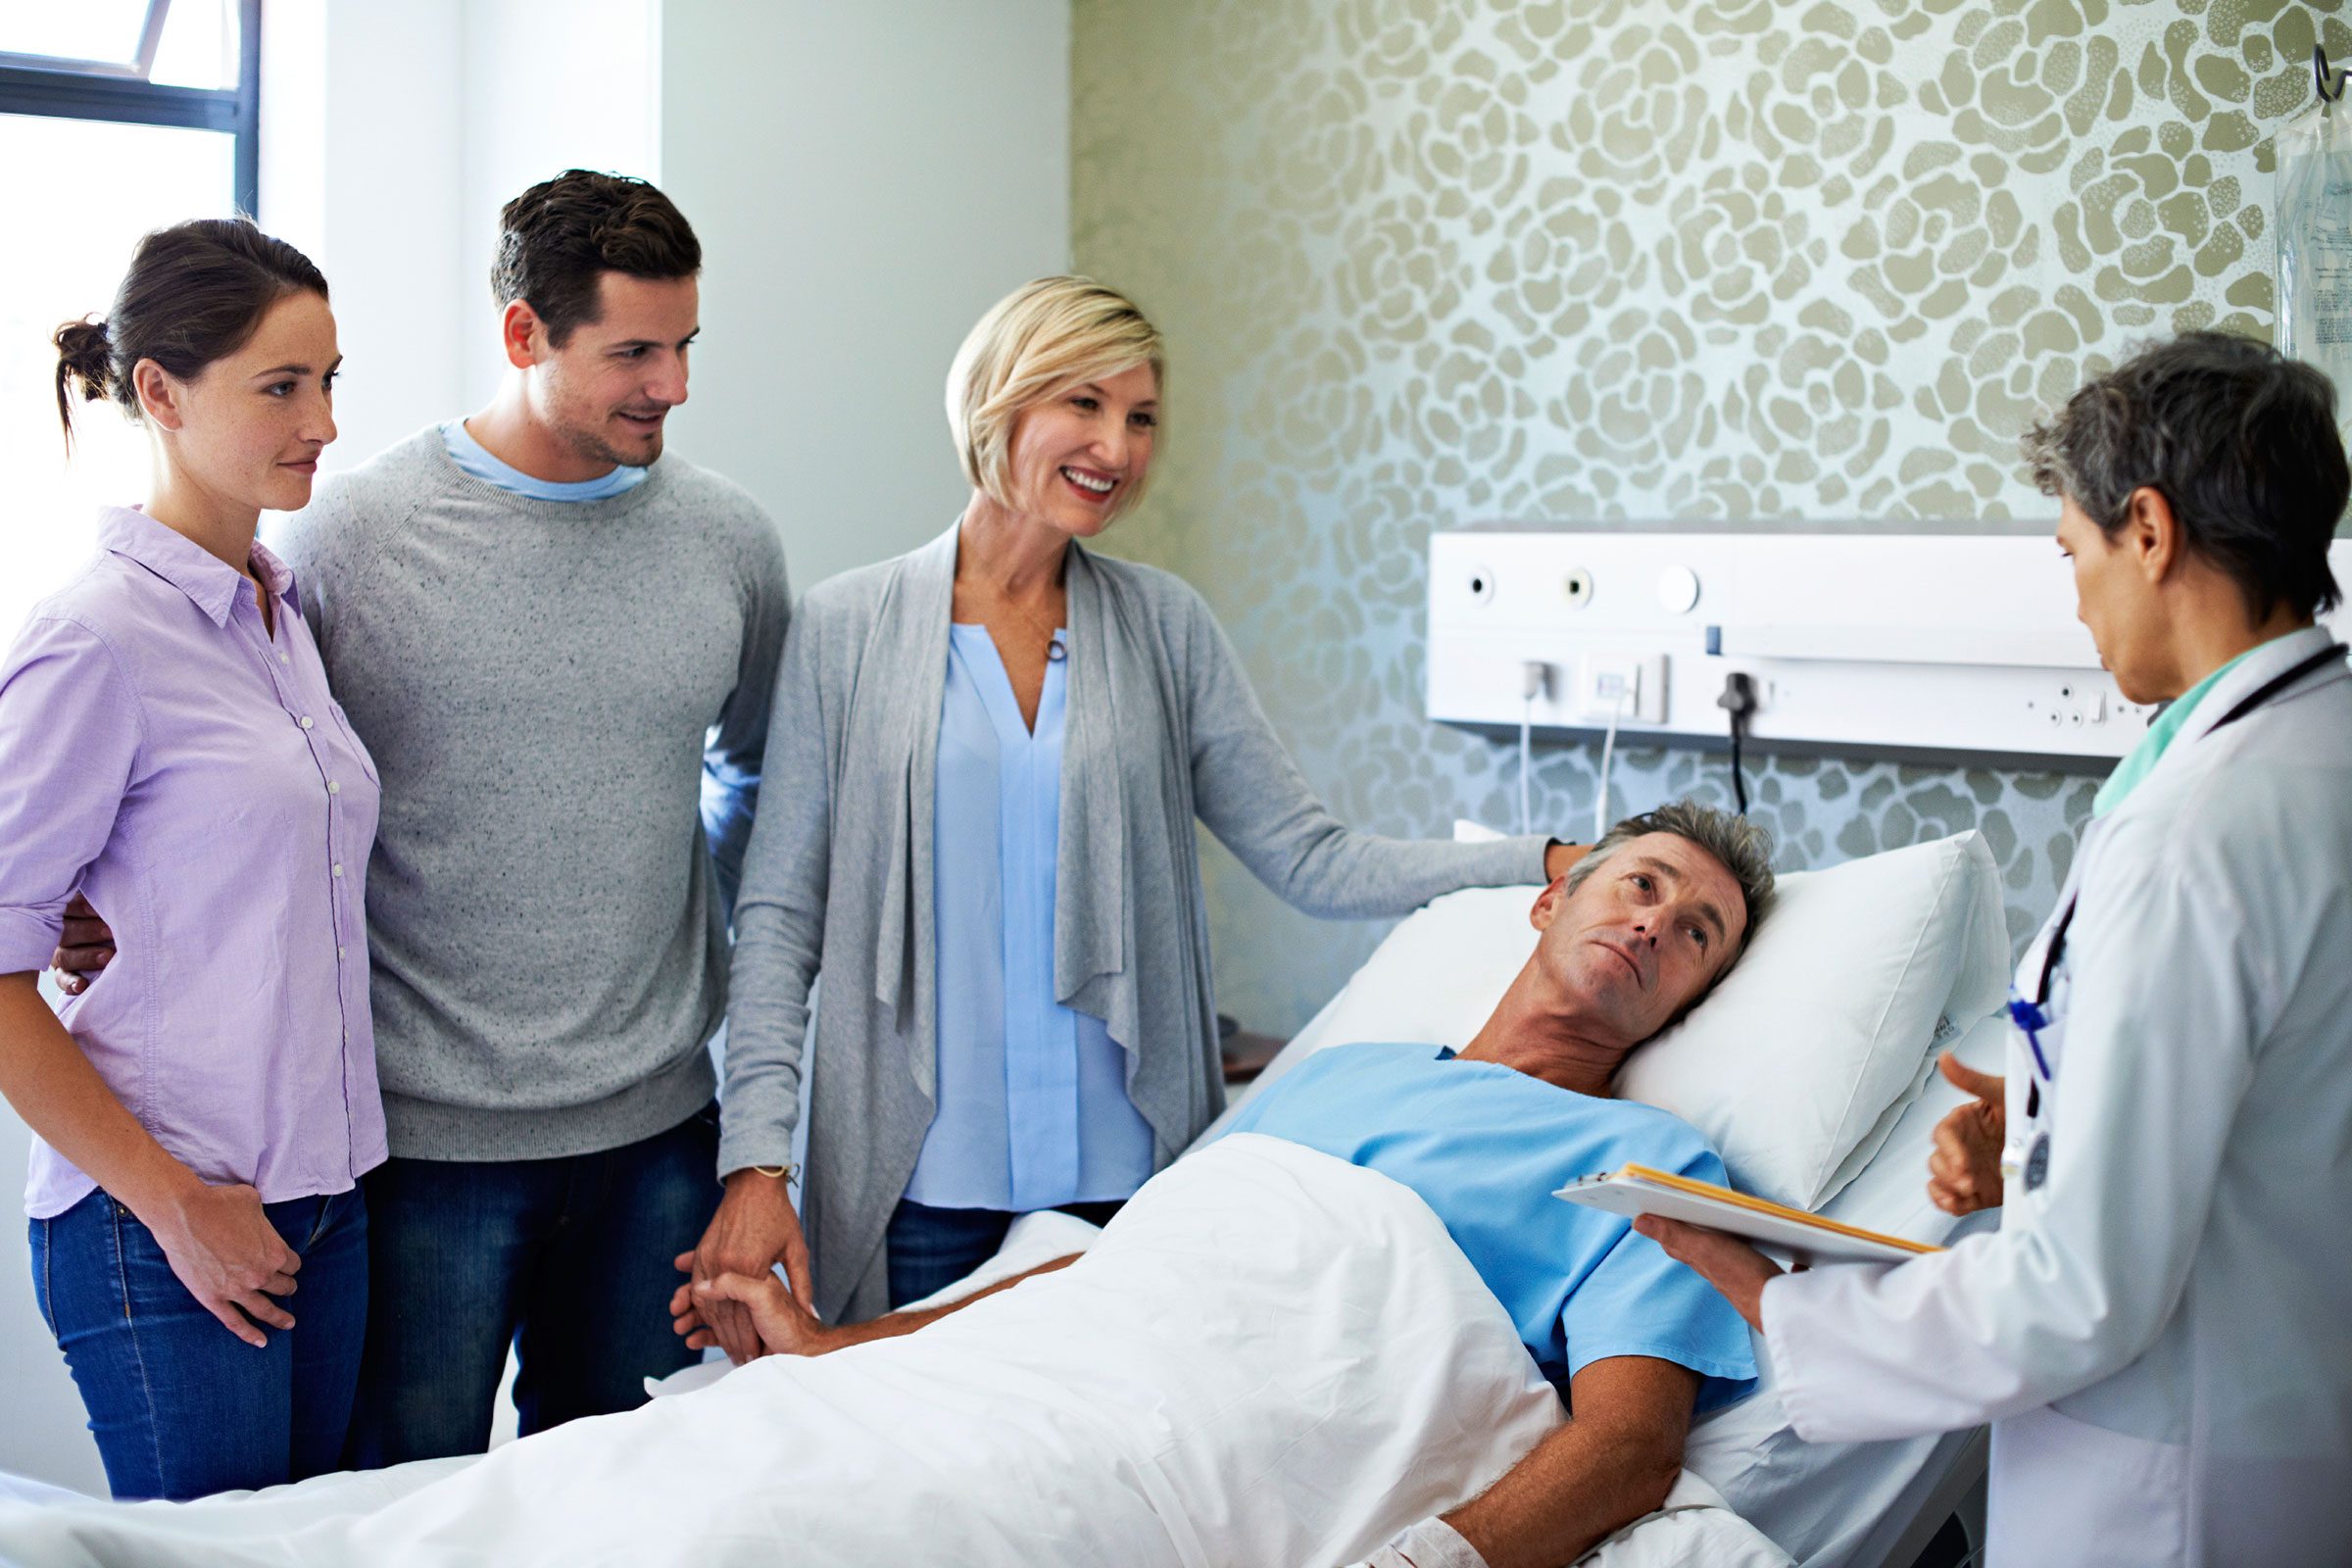 family and doctor at hospital patient's bedside